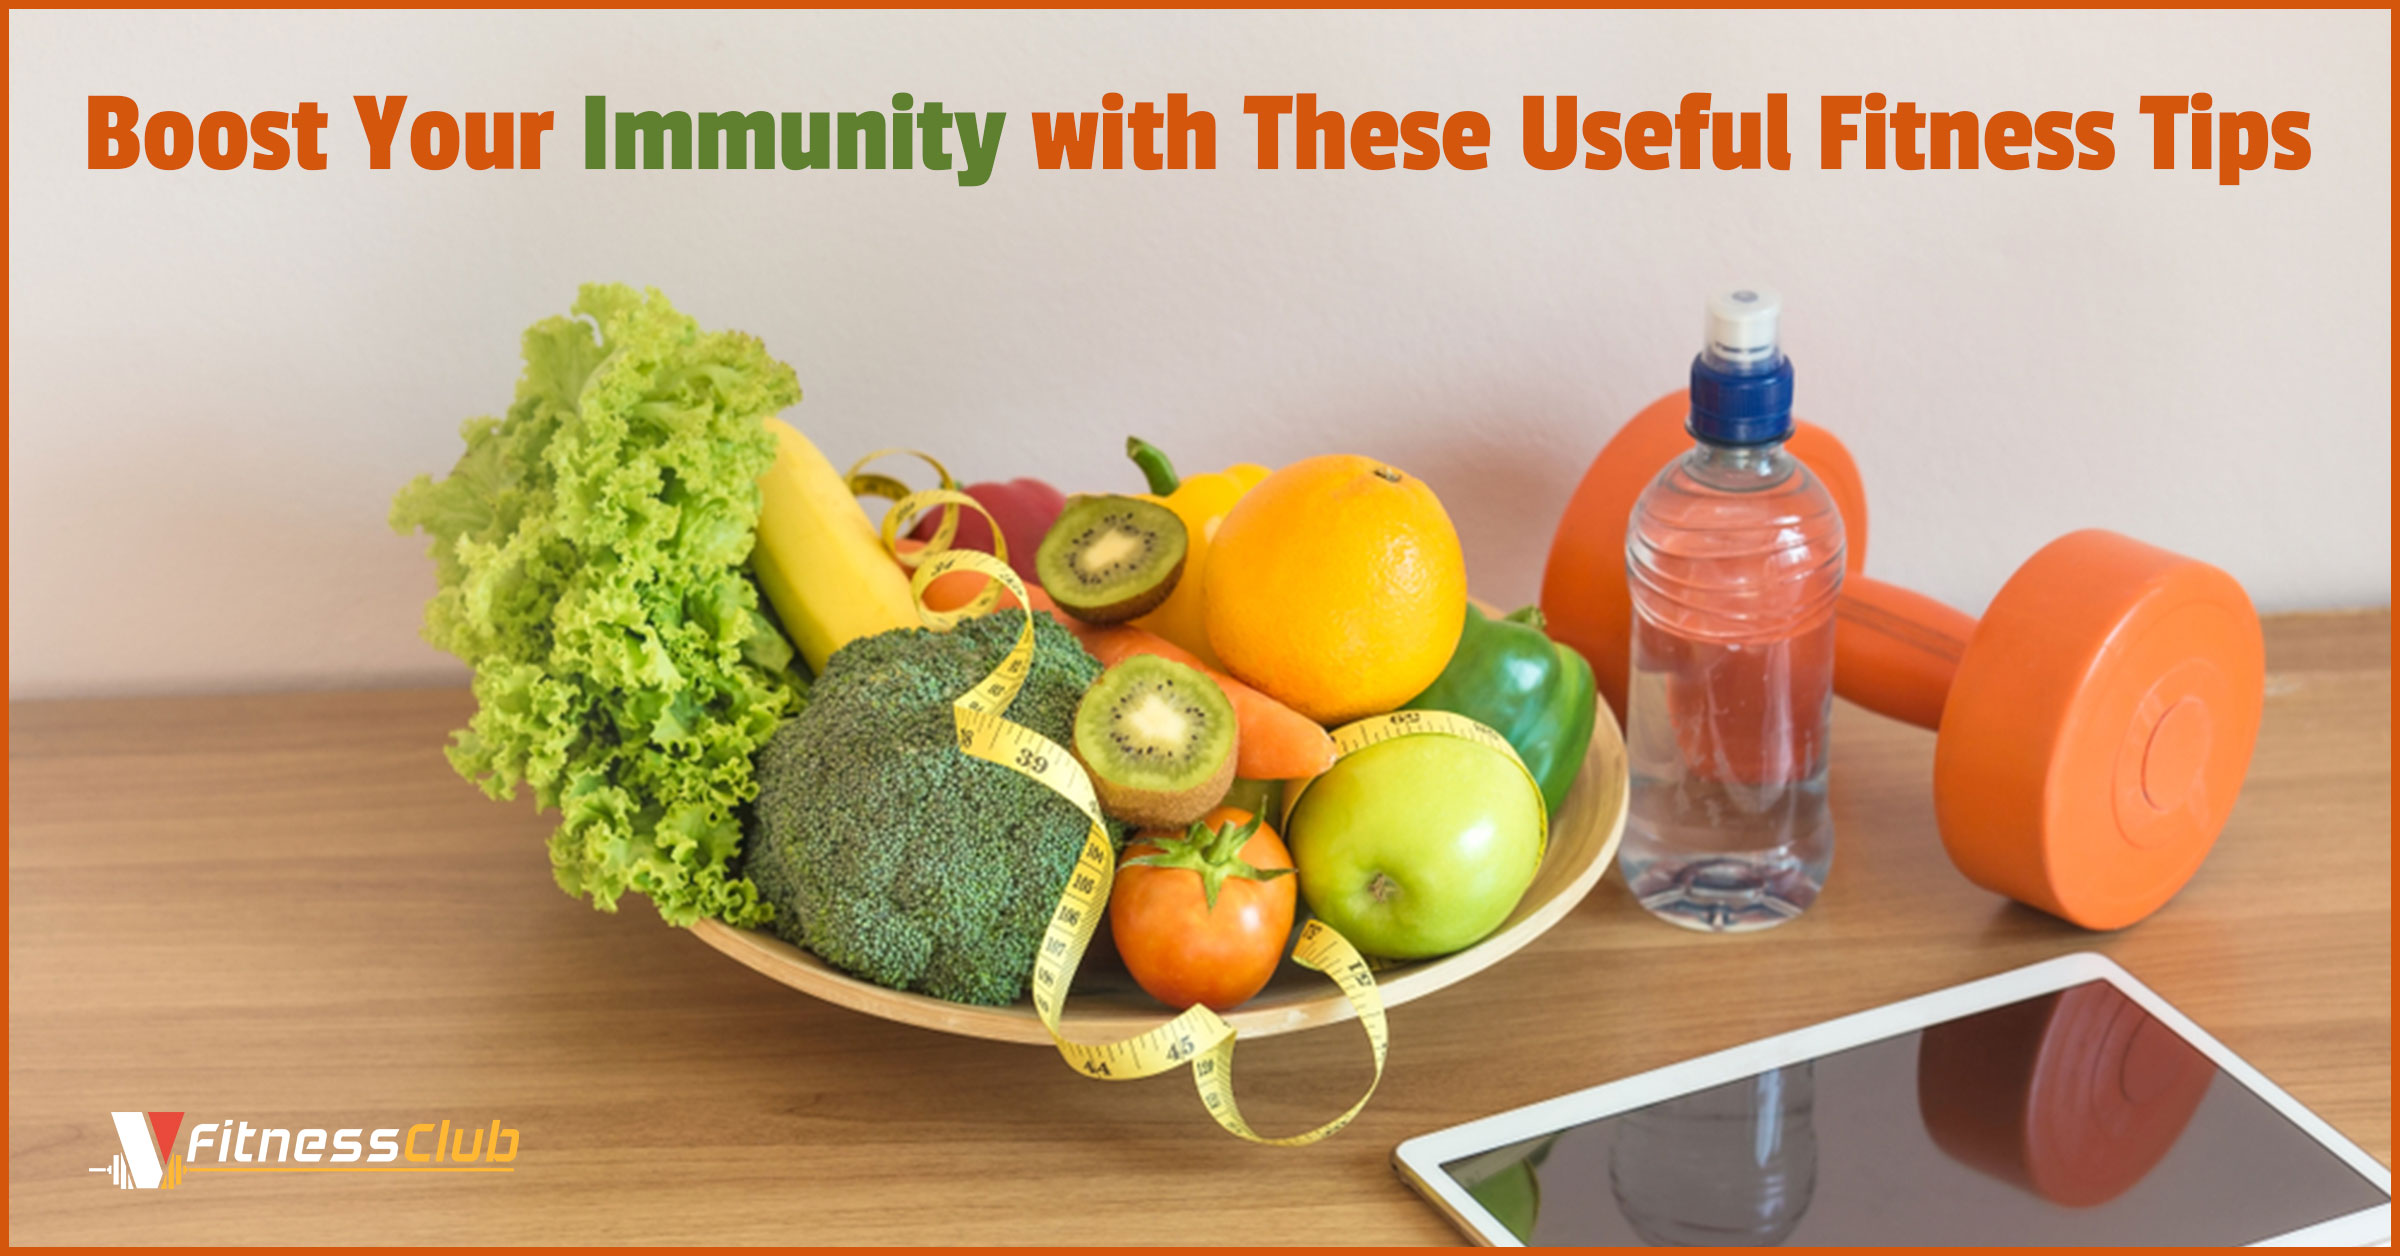 Boost Your Immunity with These Useful Fitness Tips